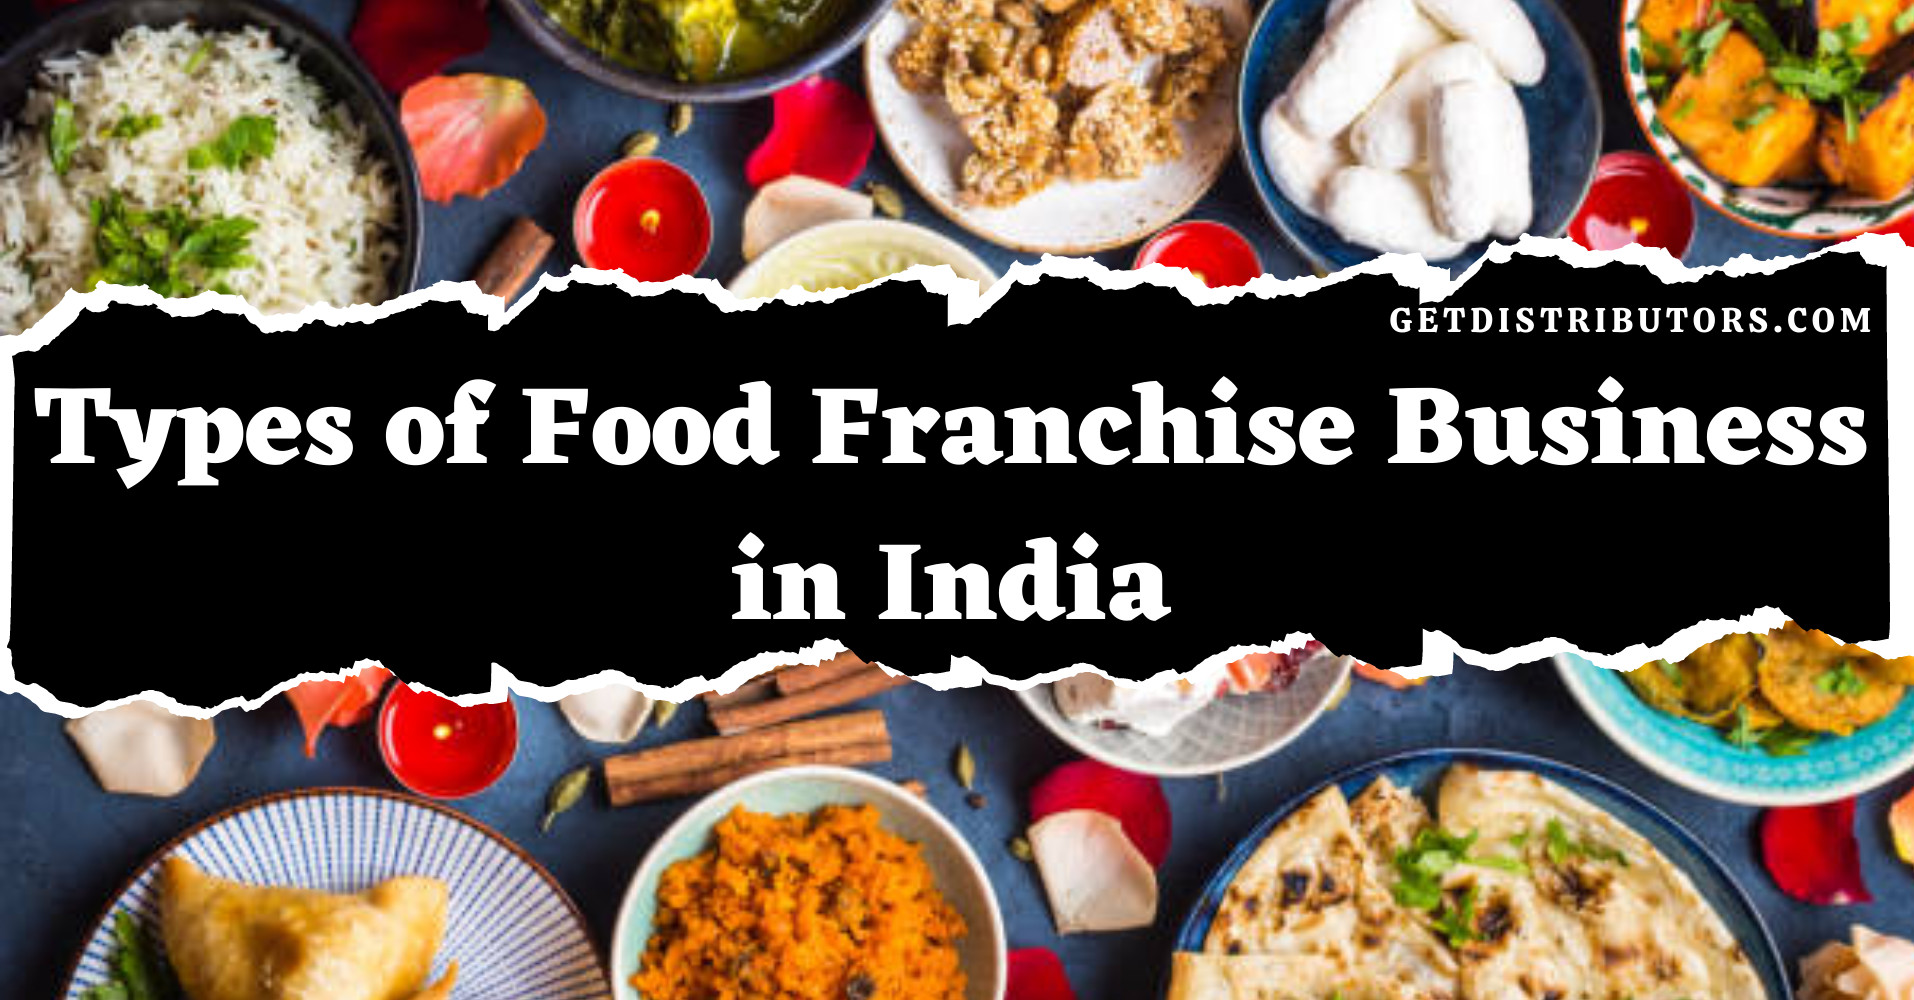 Types of Food Franchise Business in India